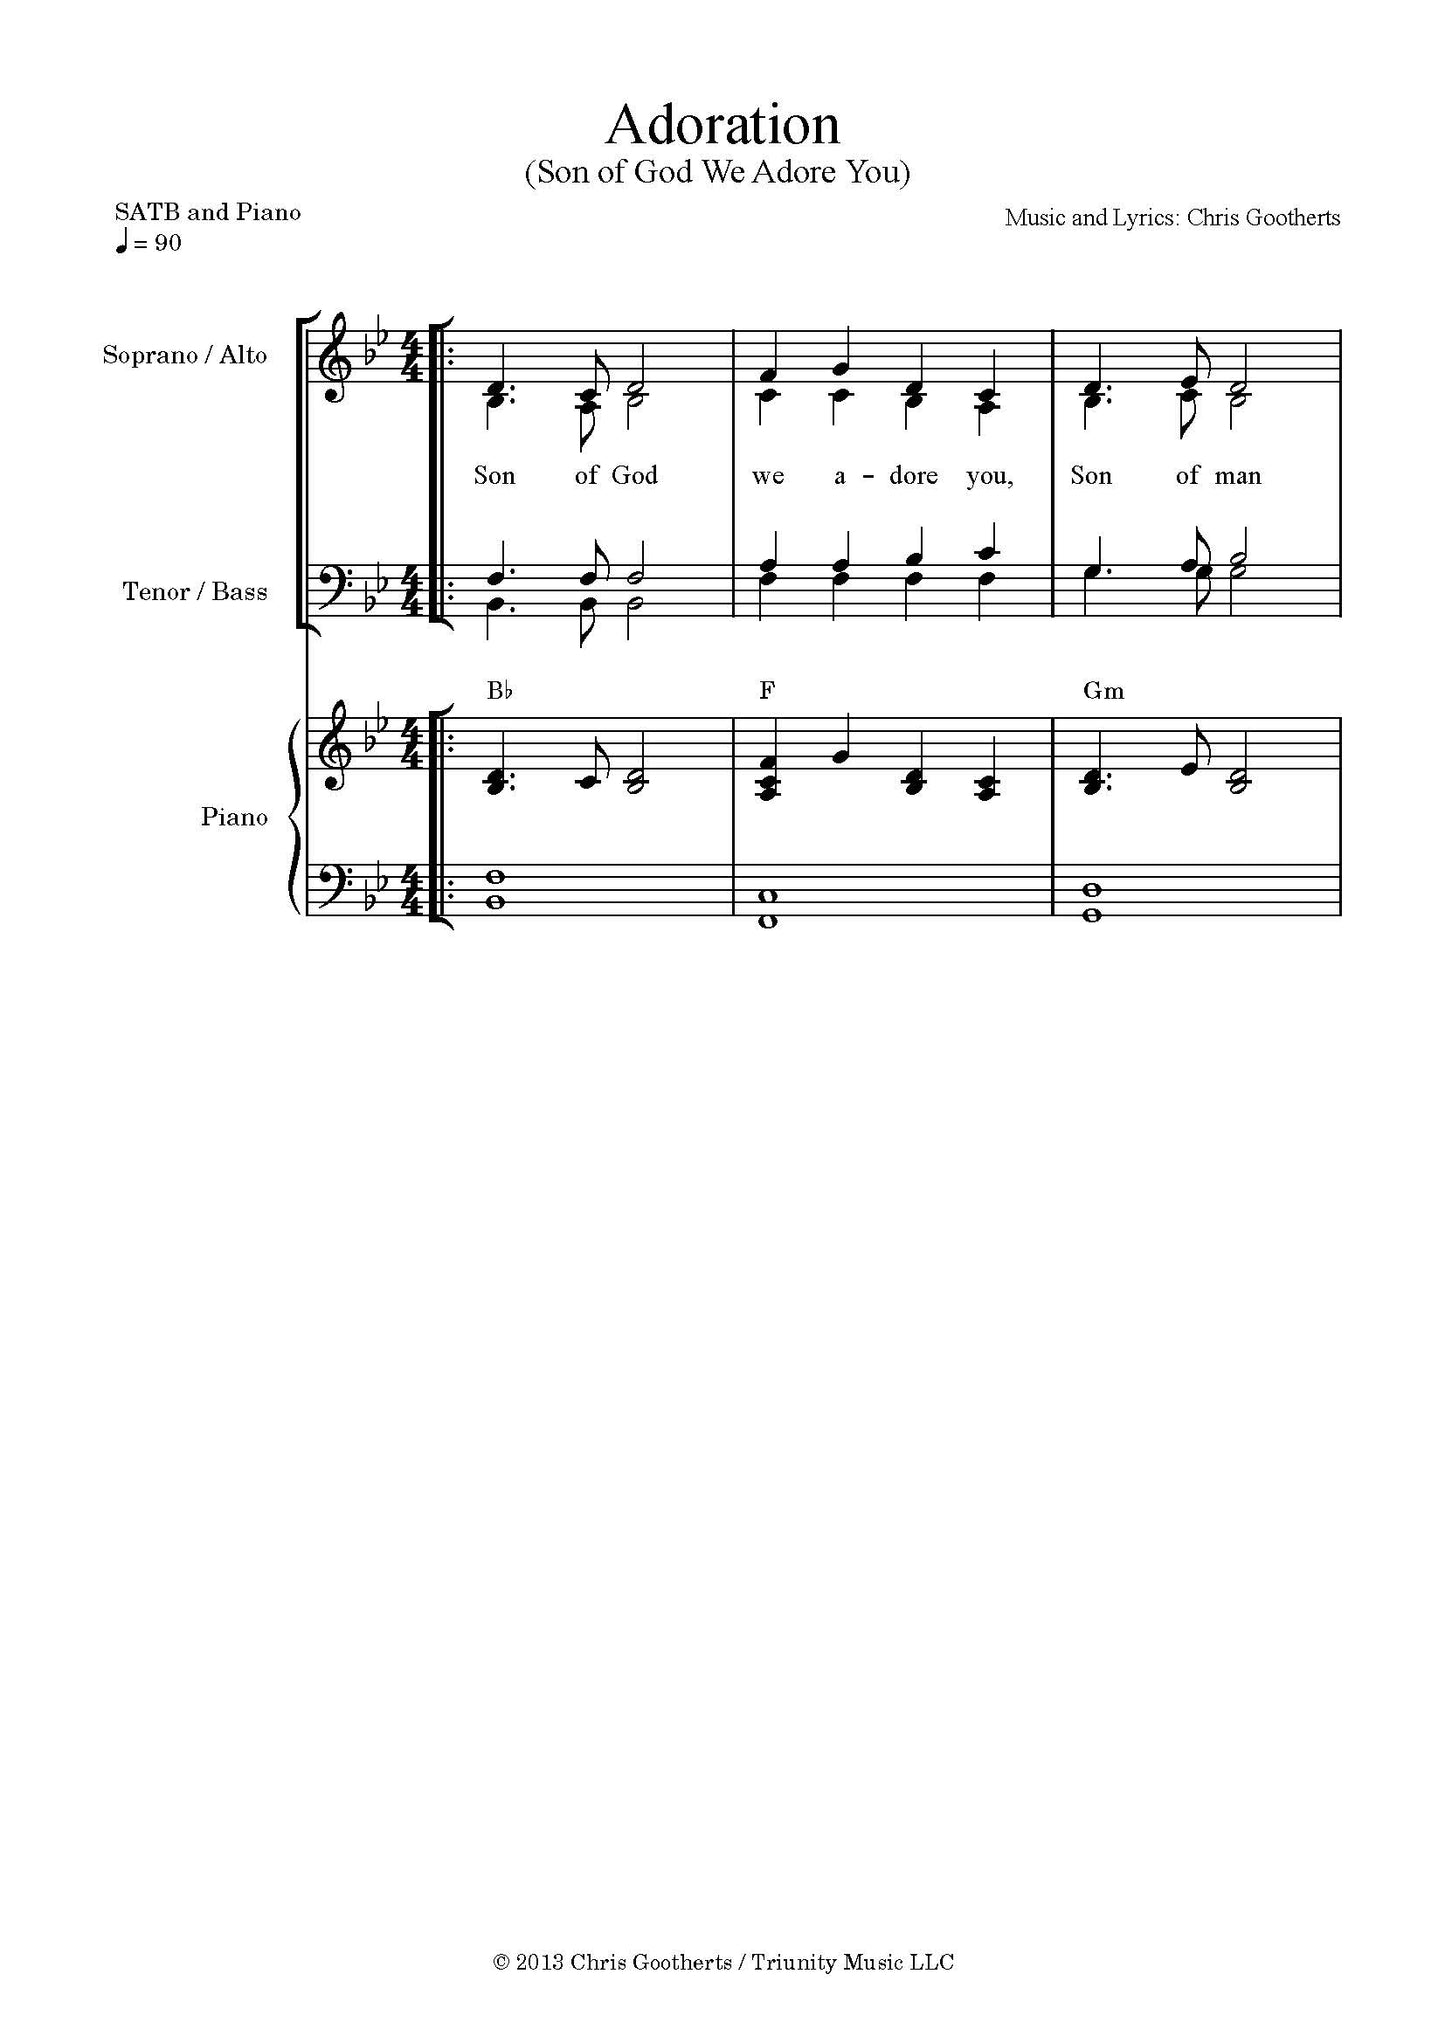 Adoration (Son of God) SATB, Piano, and Lead Sheet